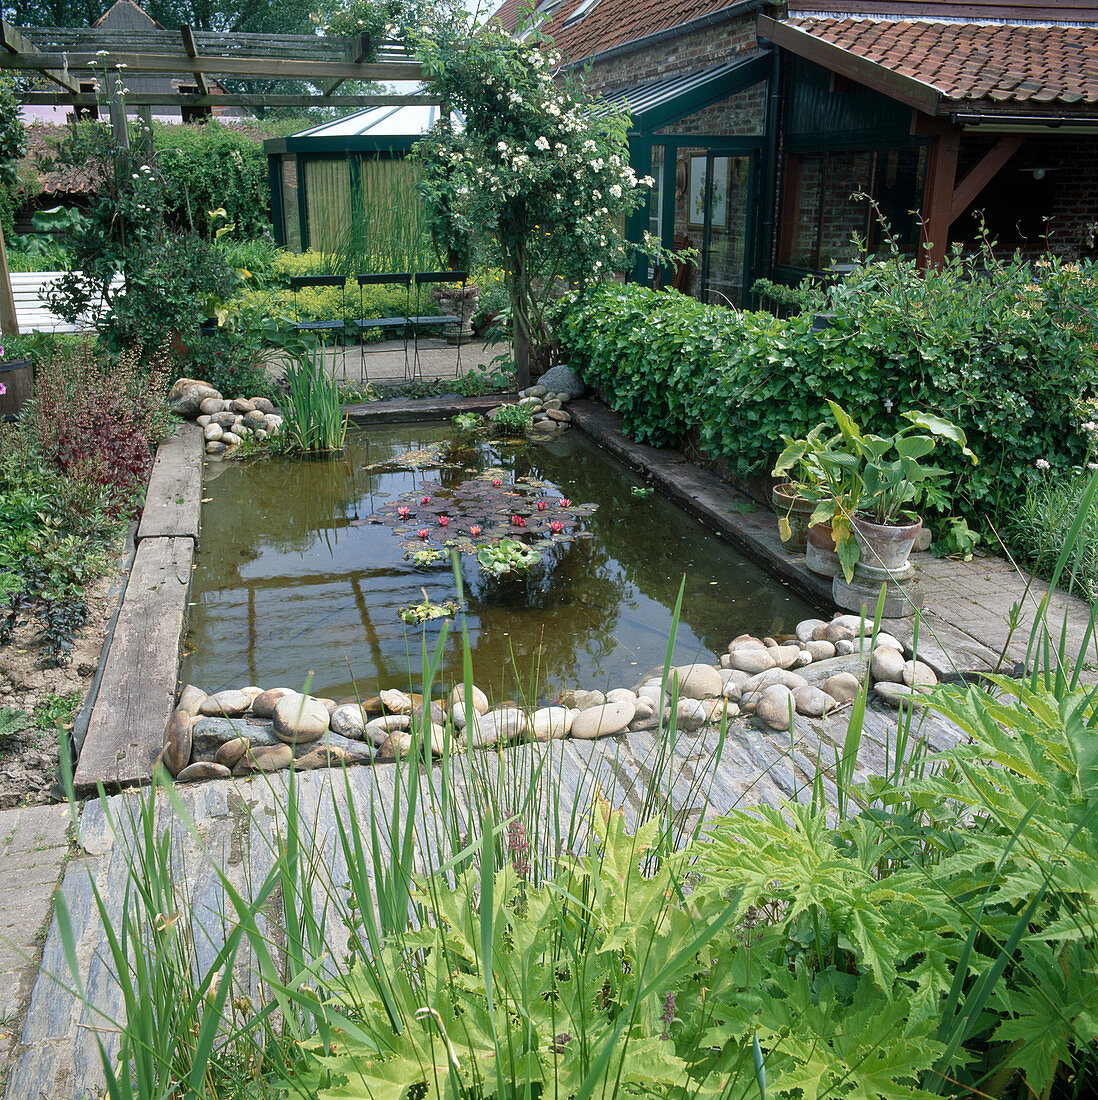 Rectangular garden pond bordered with wooden planks and coarse gravel, Nymphaea (water lilies), Rosa (climbing roses) on pergola, low hedge of Hedera (ivy), house with conservatory